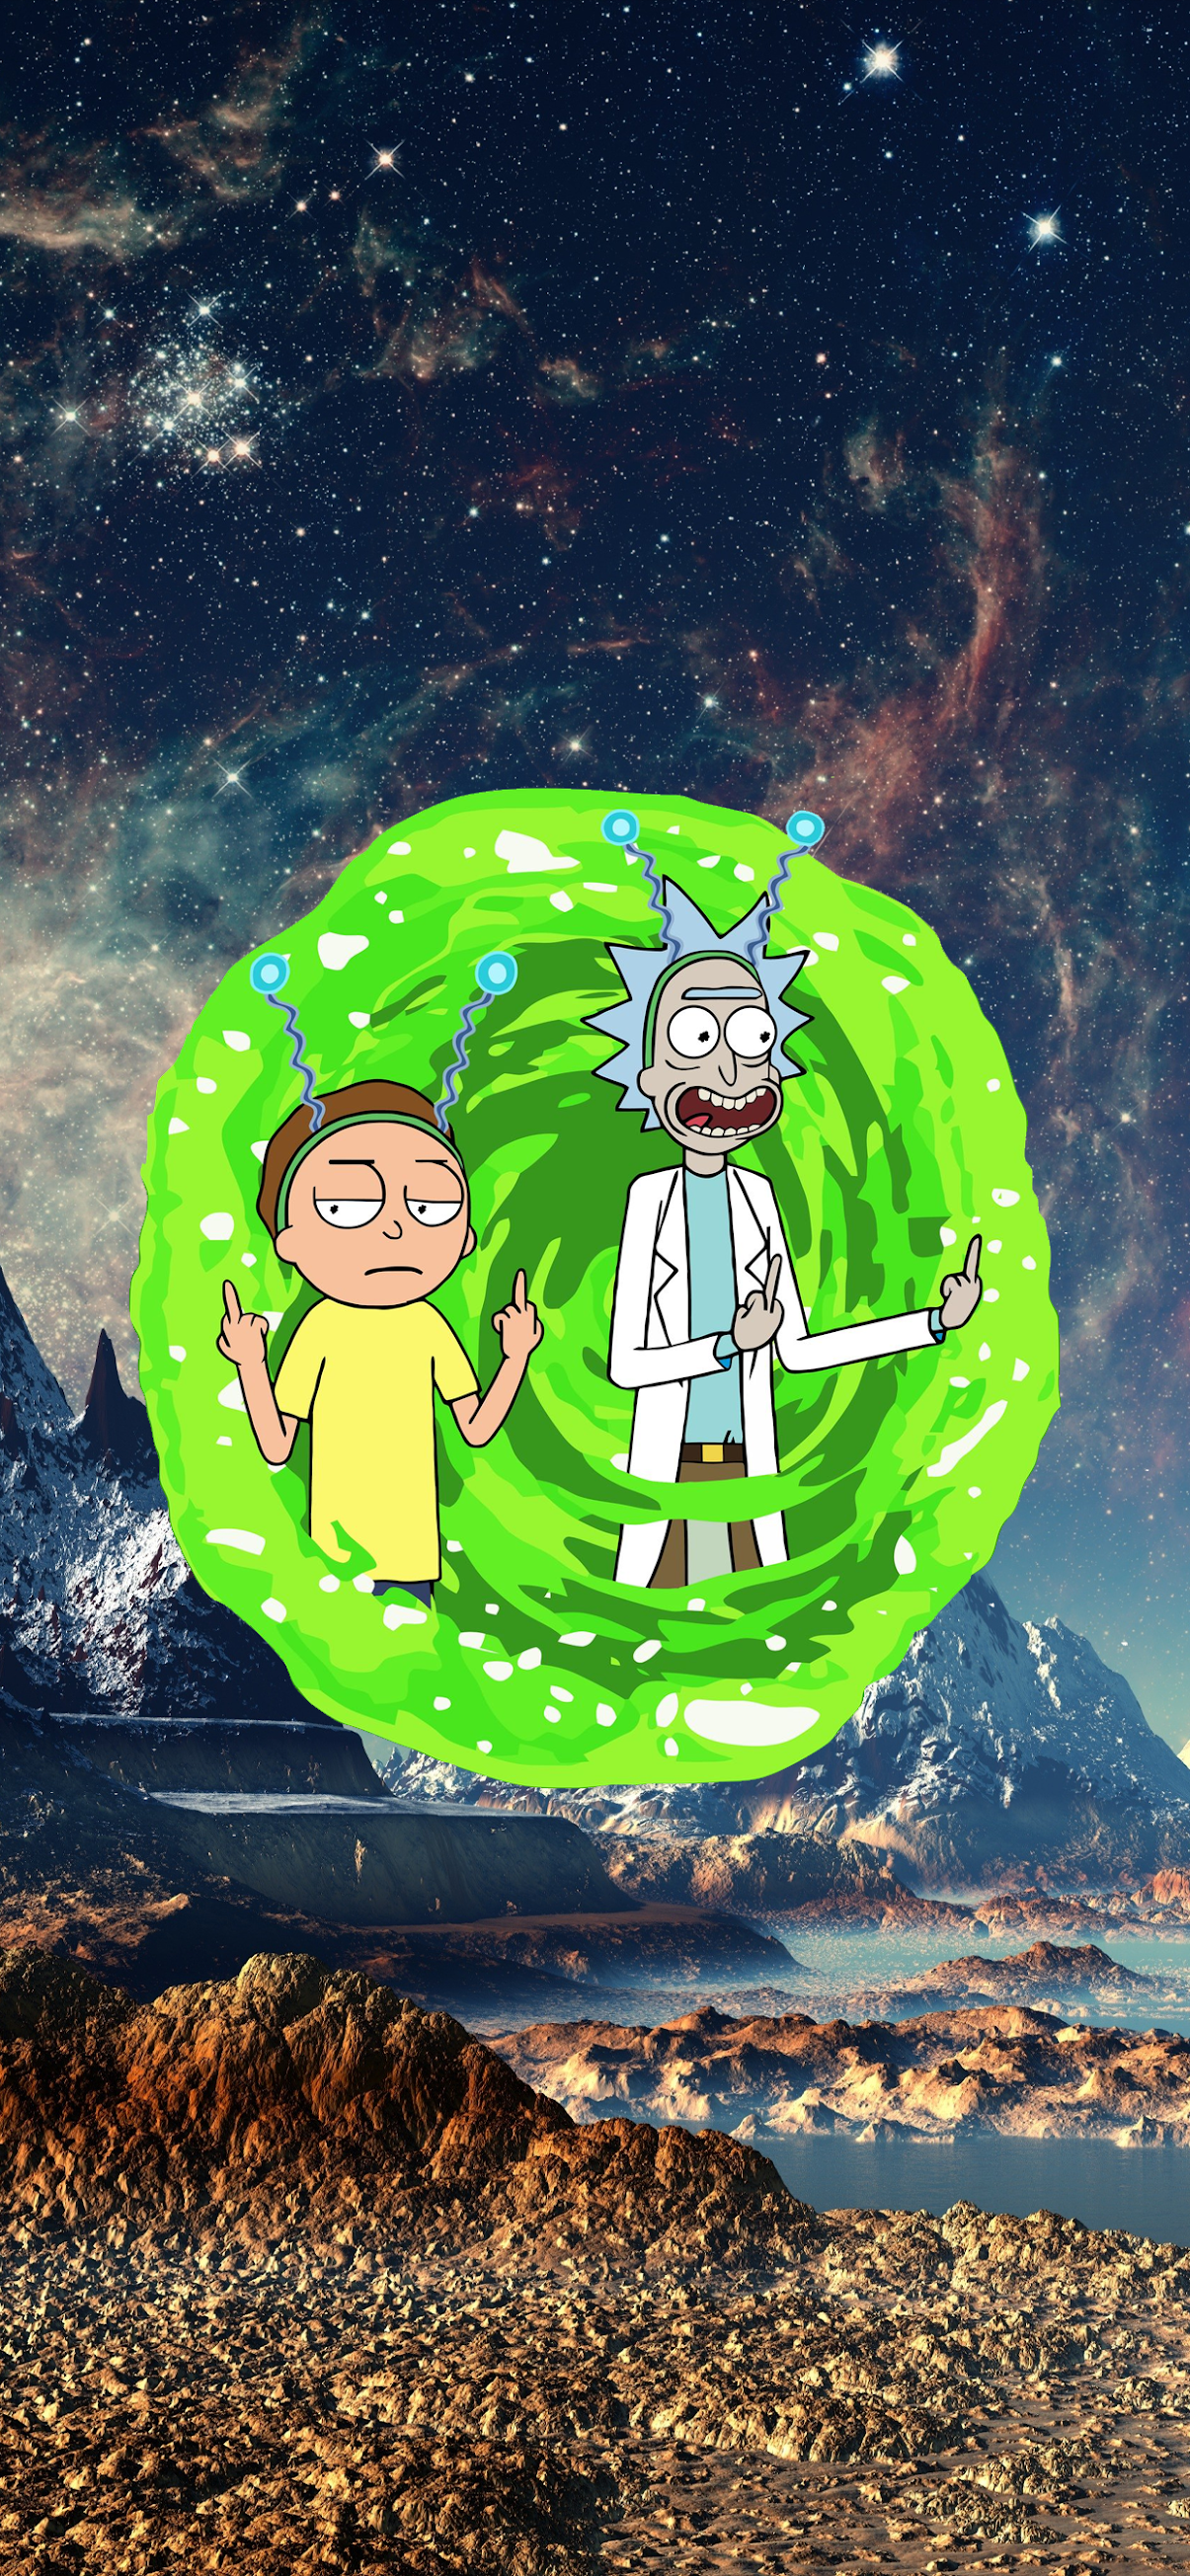 Rick and Morty phone wallpaper collection 153